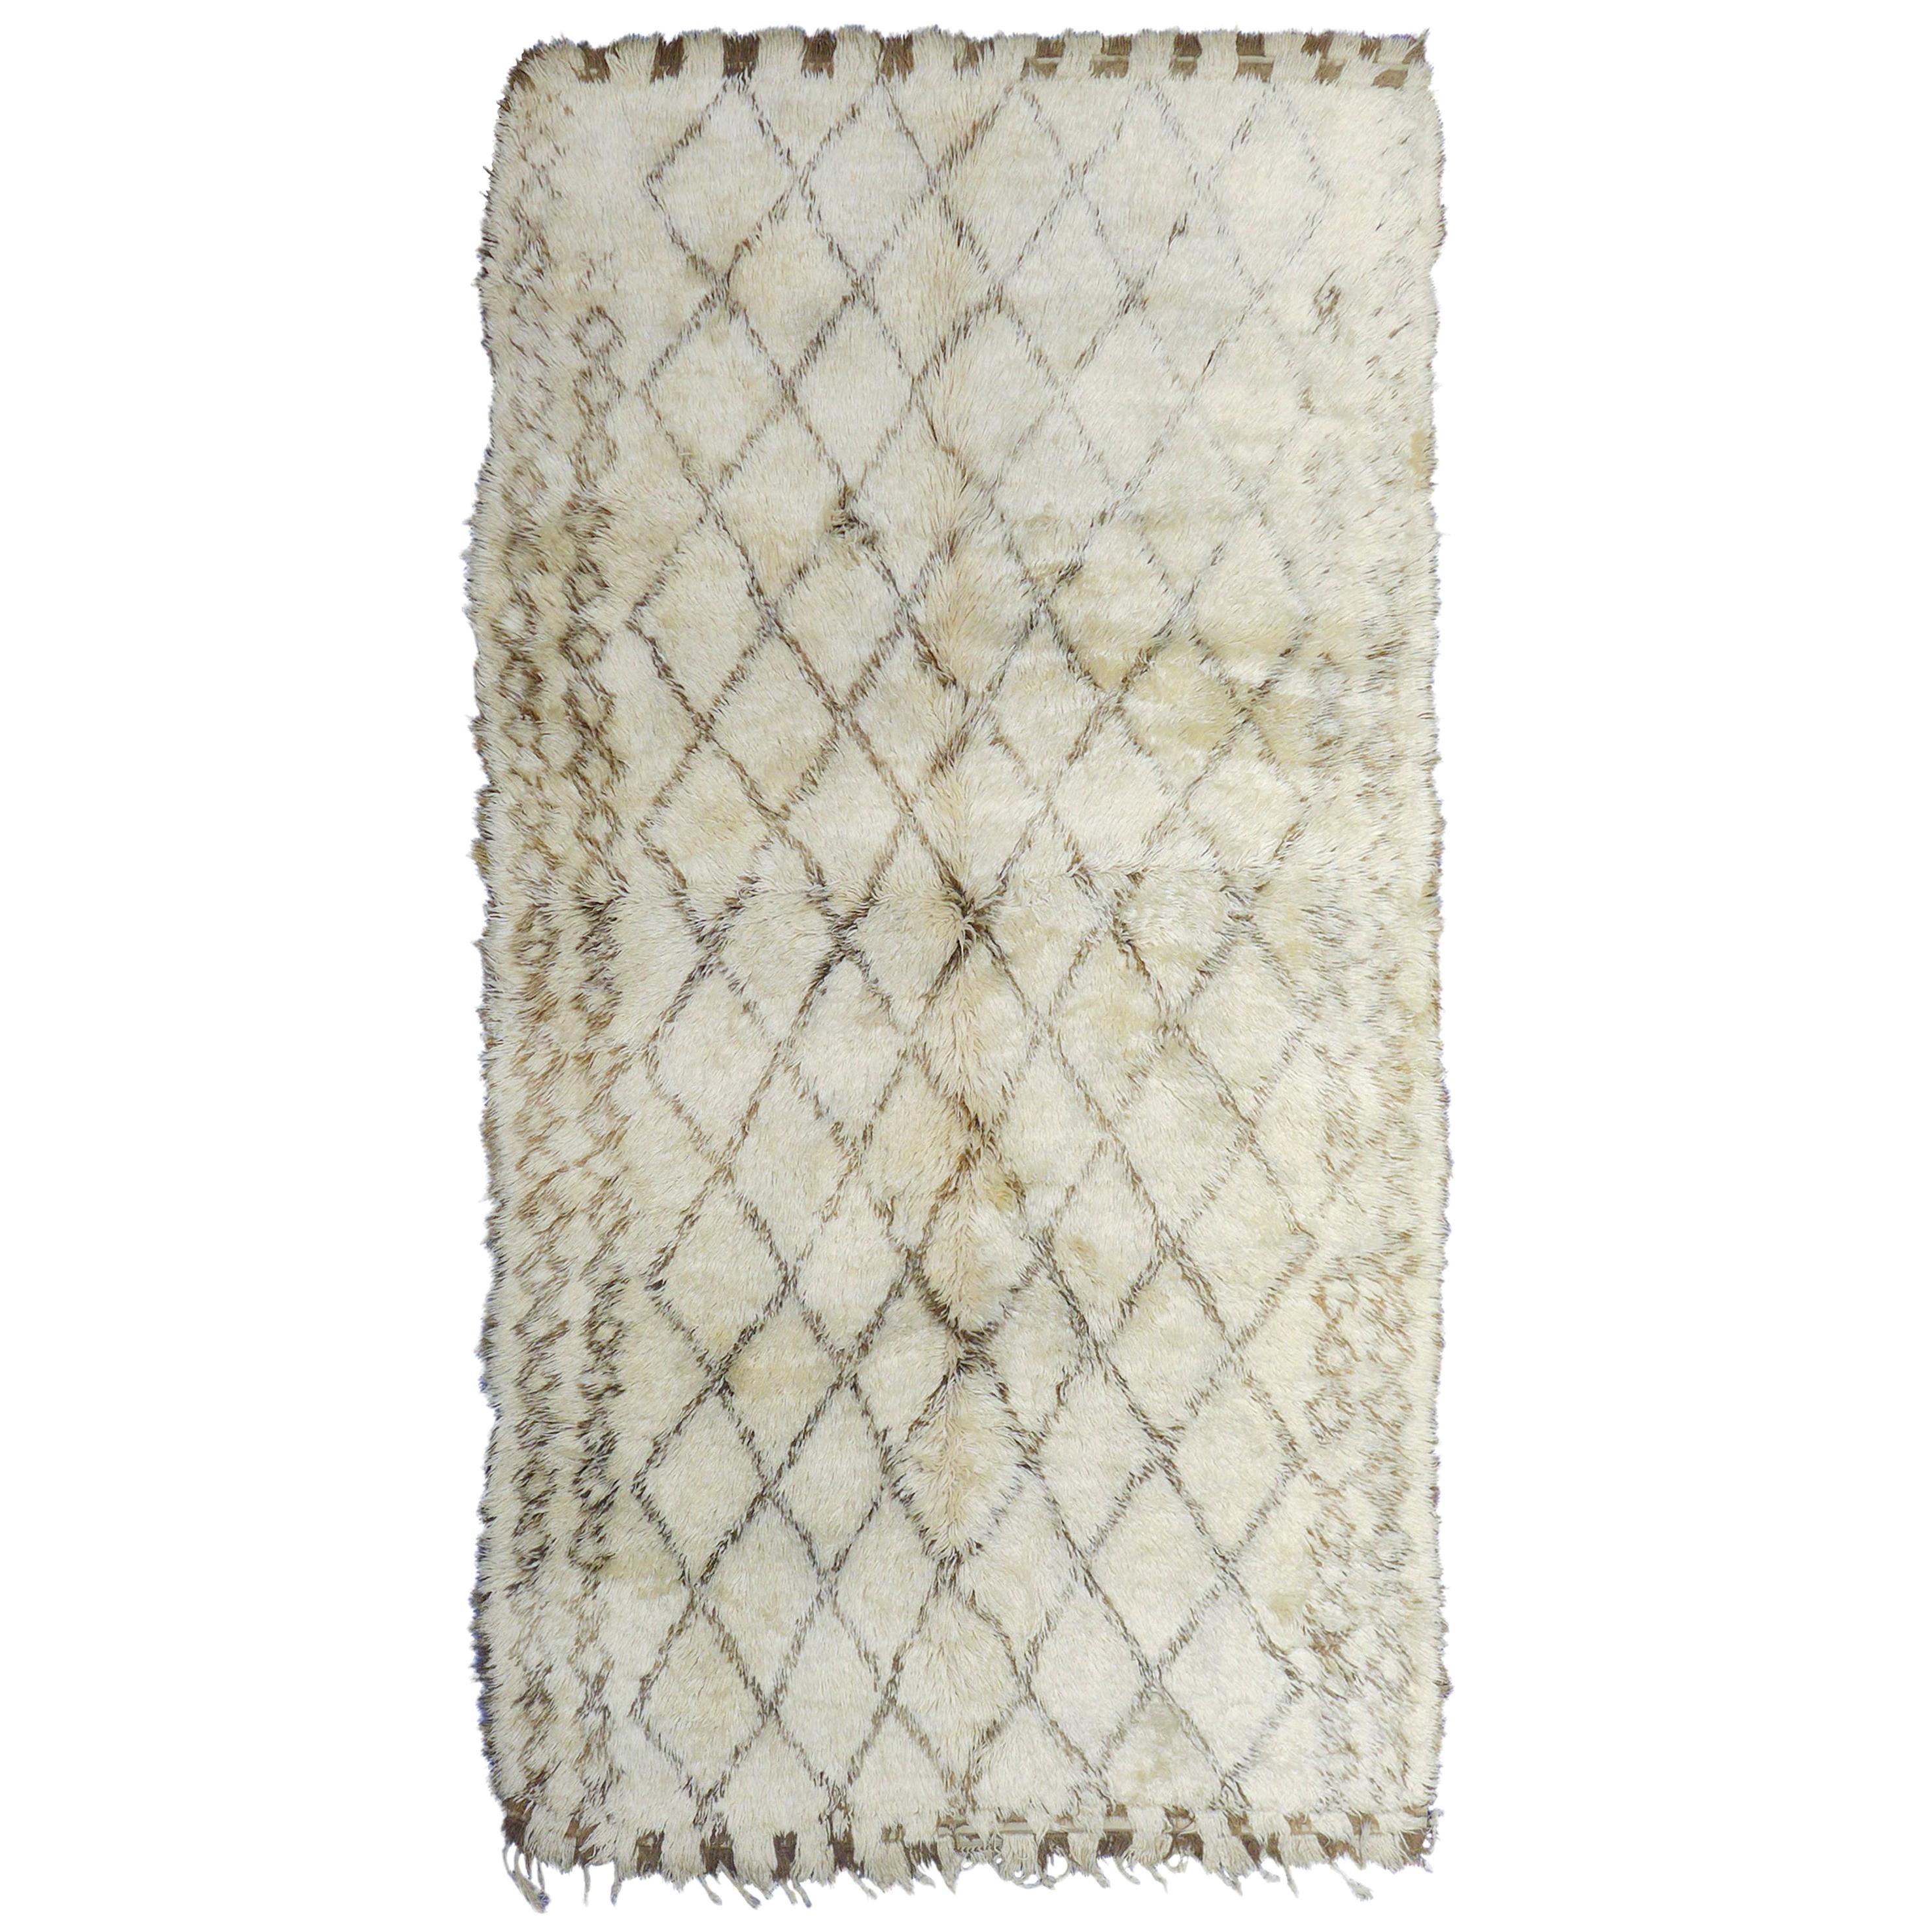 Vintage Moroccan Berber Rug with Natural Ivory Wool and Olive Color Accent For Sale